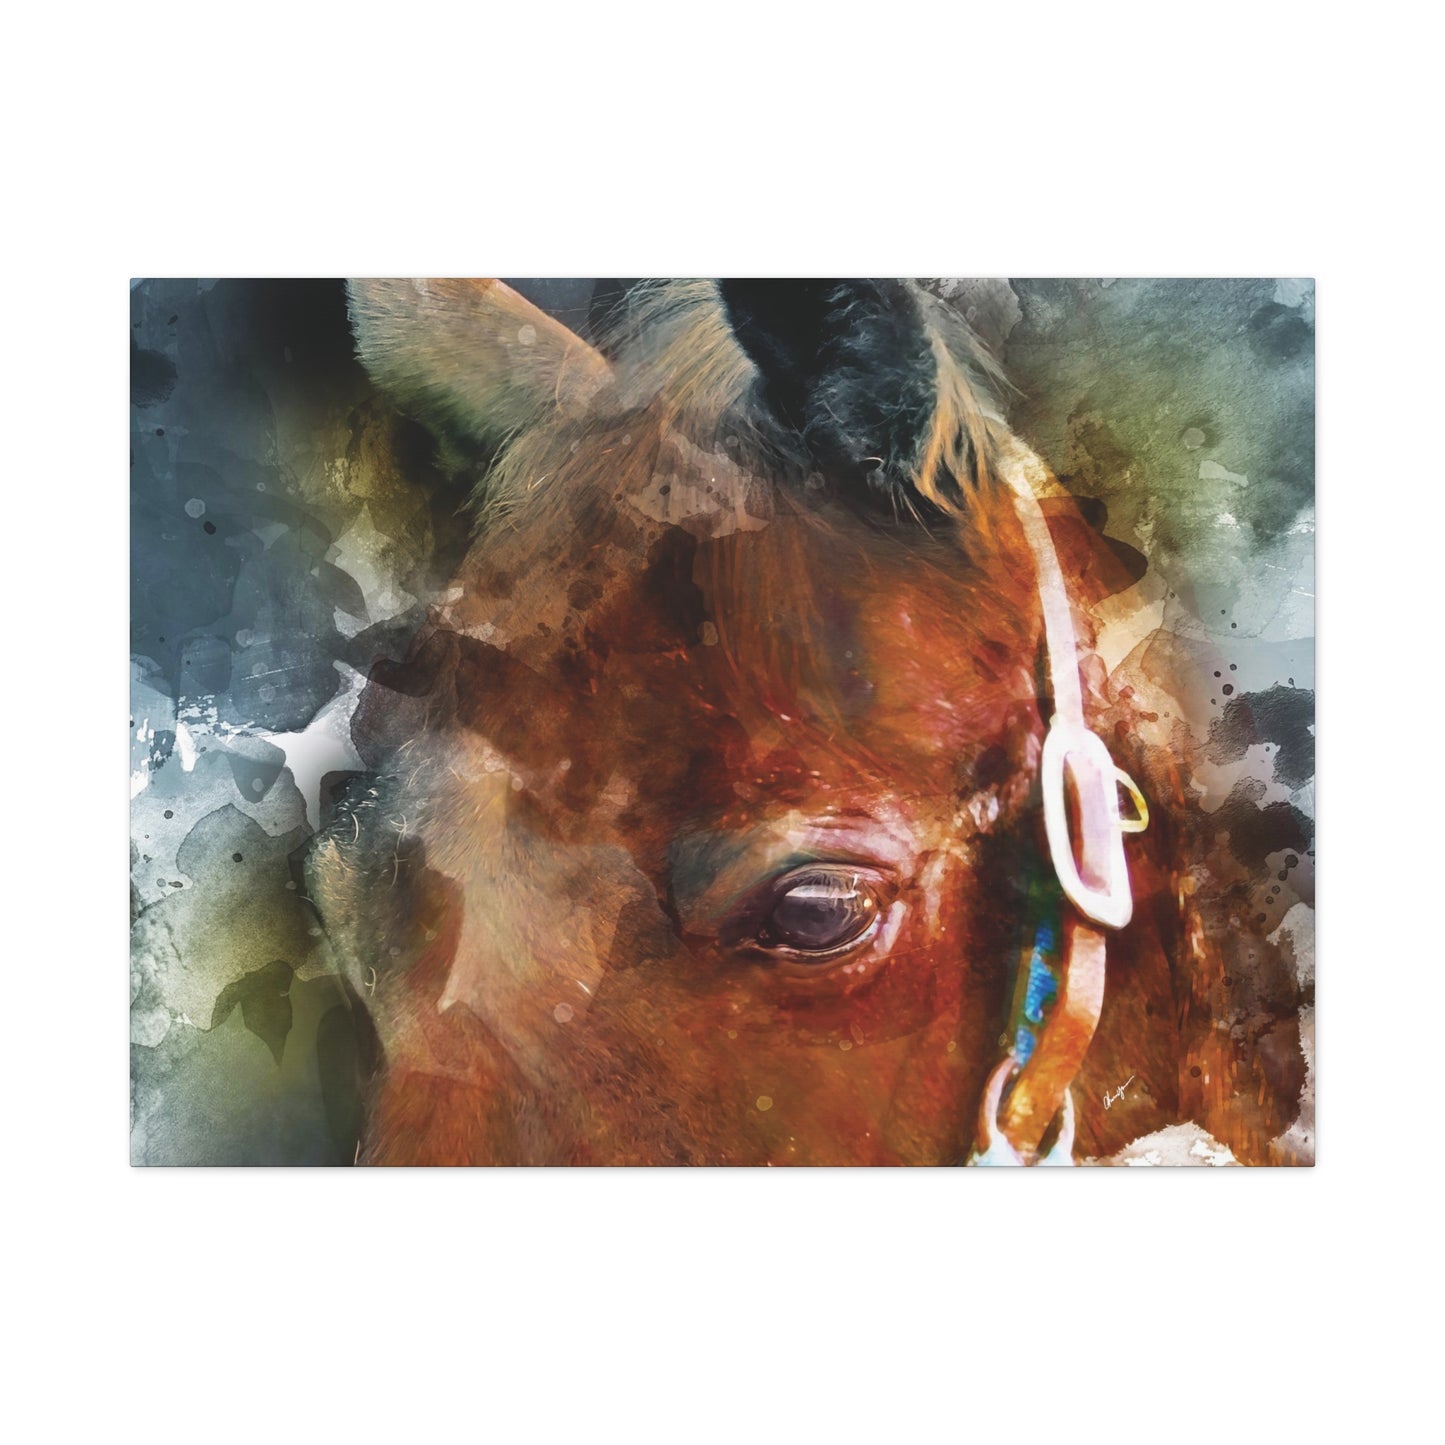 Those Eyes 2 - Standard Unembellished Canvas Gallery Wrap